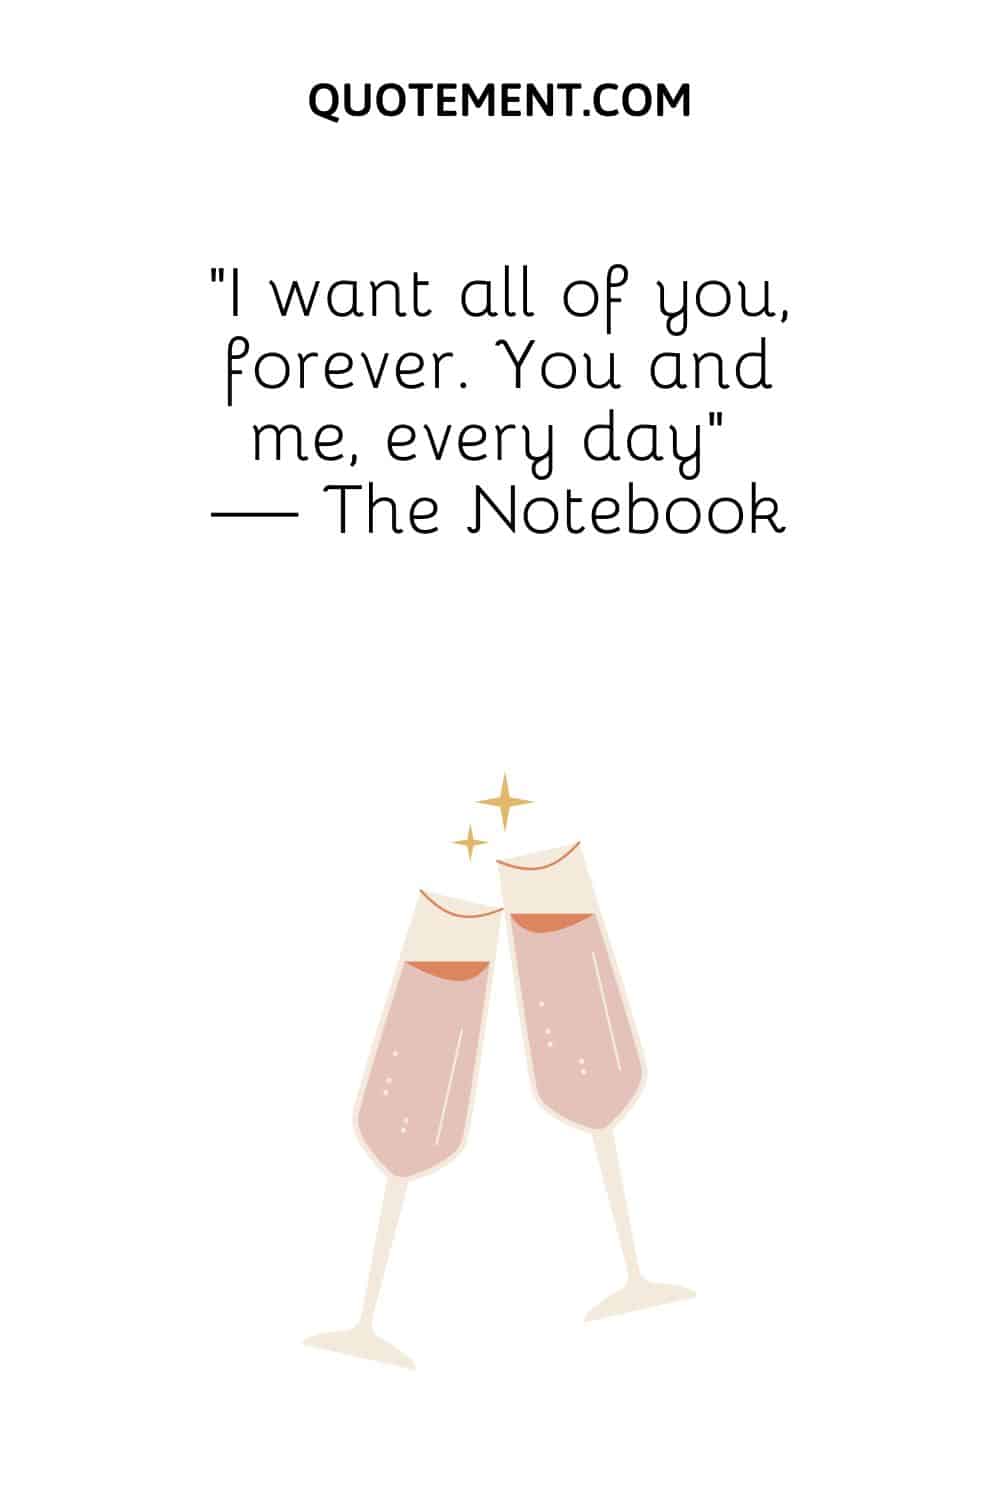 I want all of you, forever. You and me, every day” — The Notebook